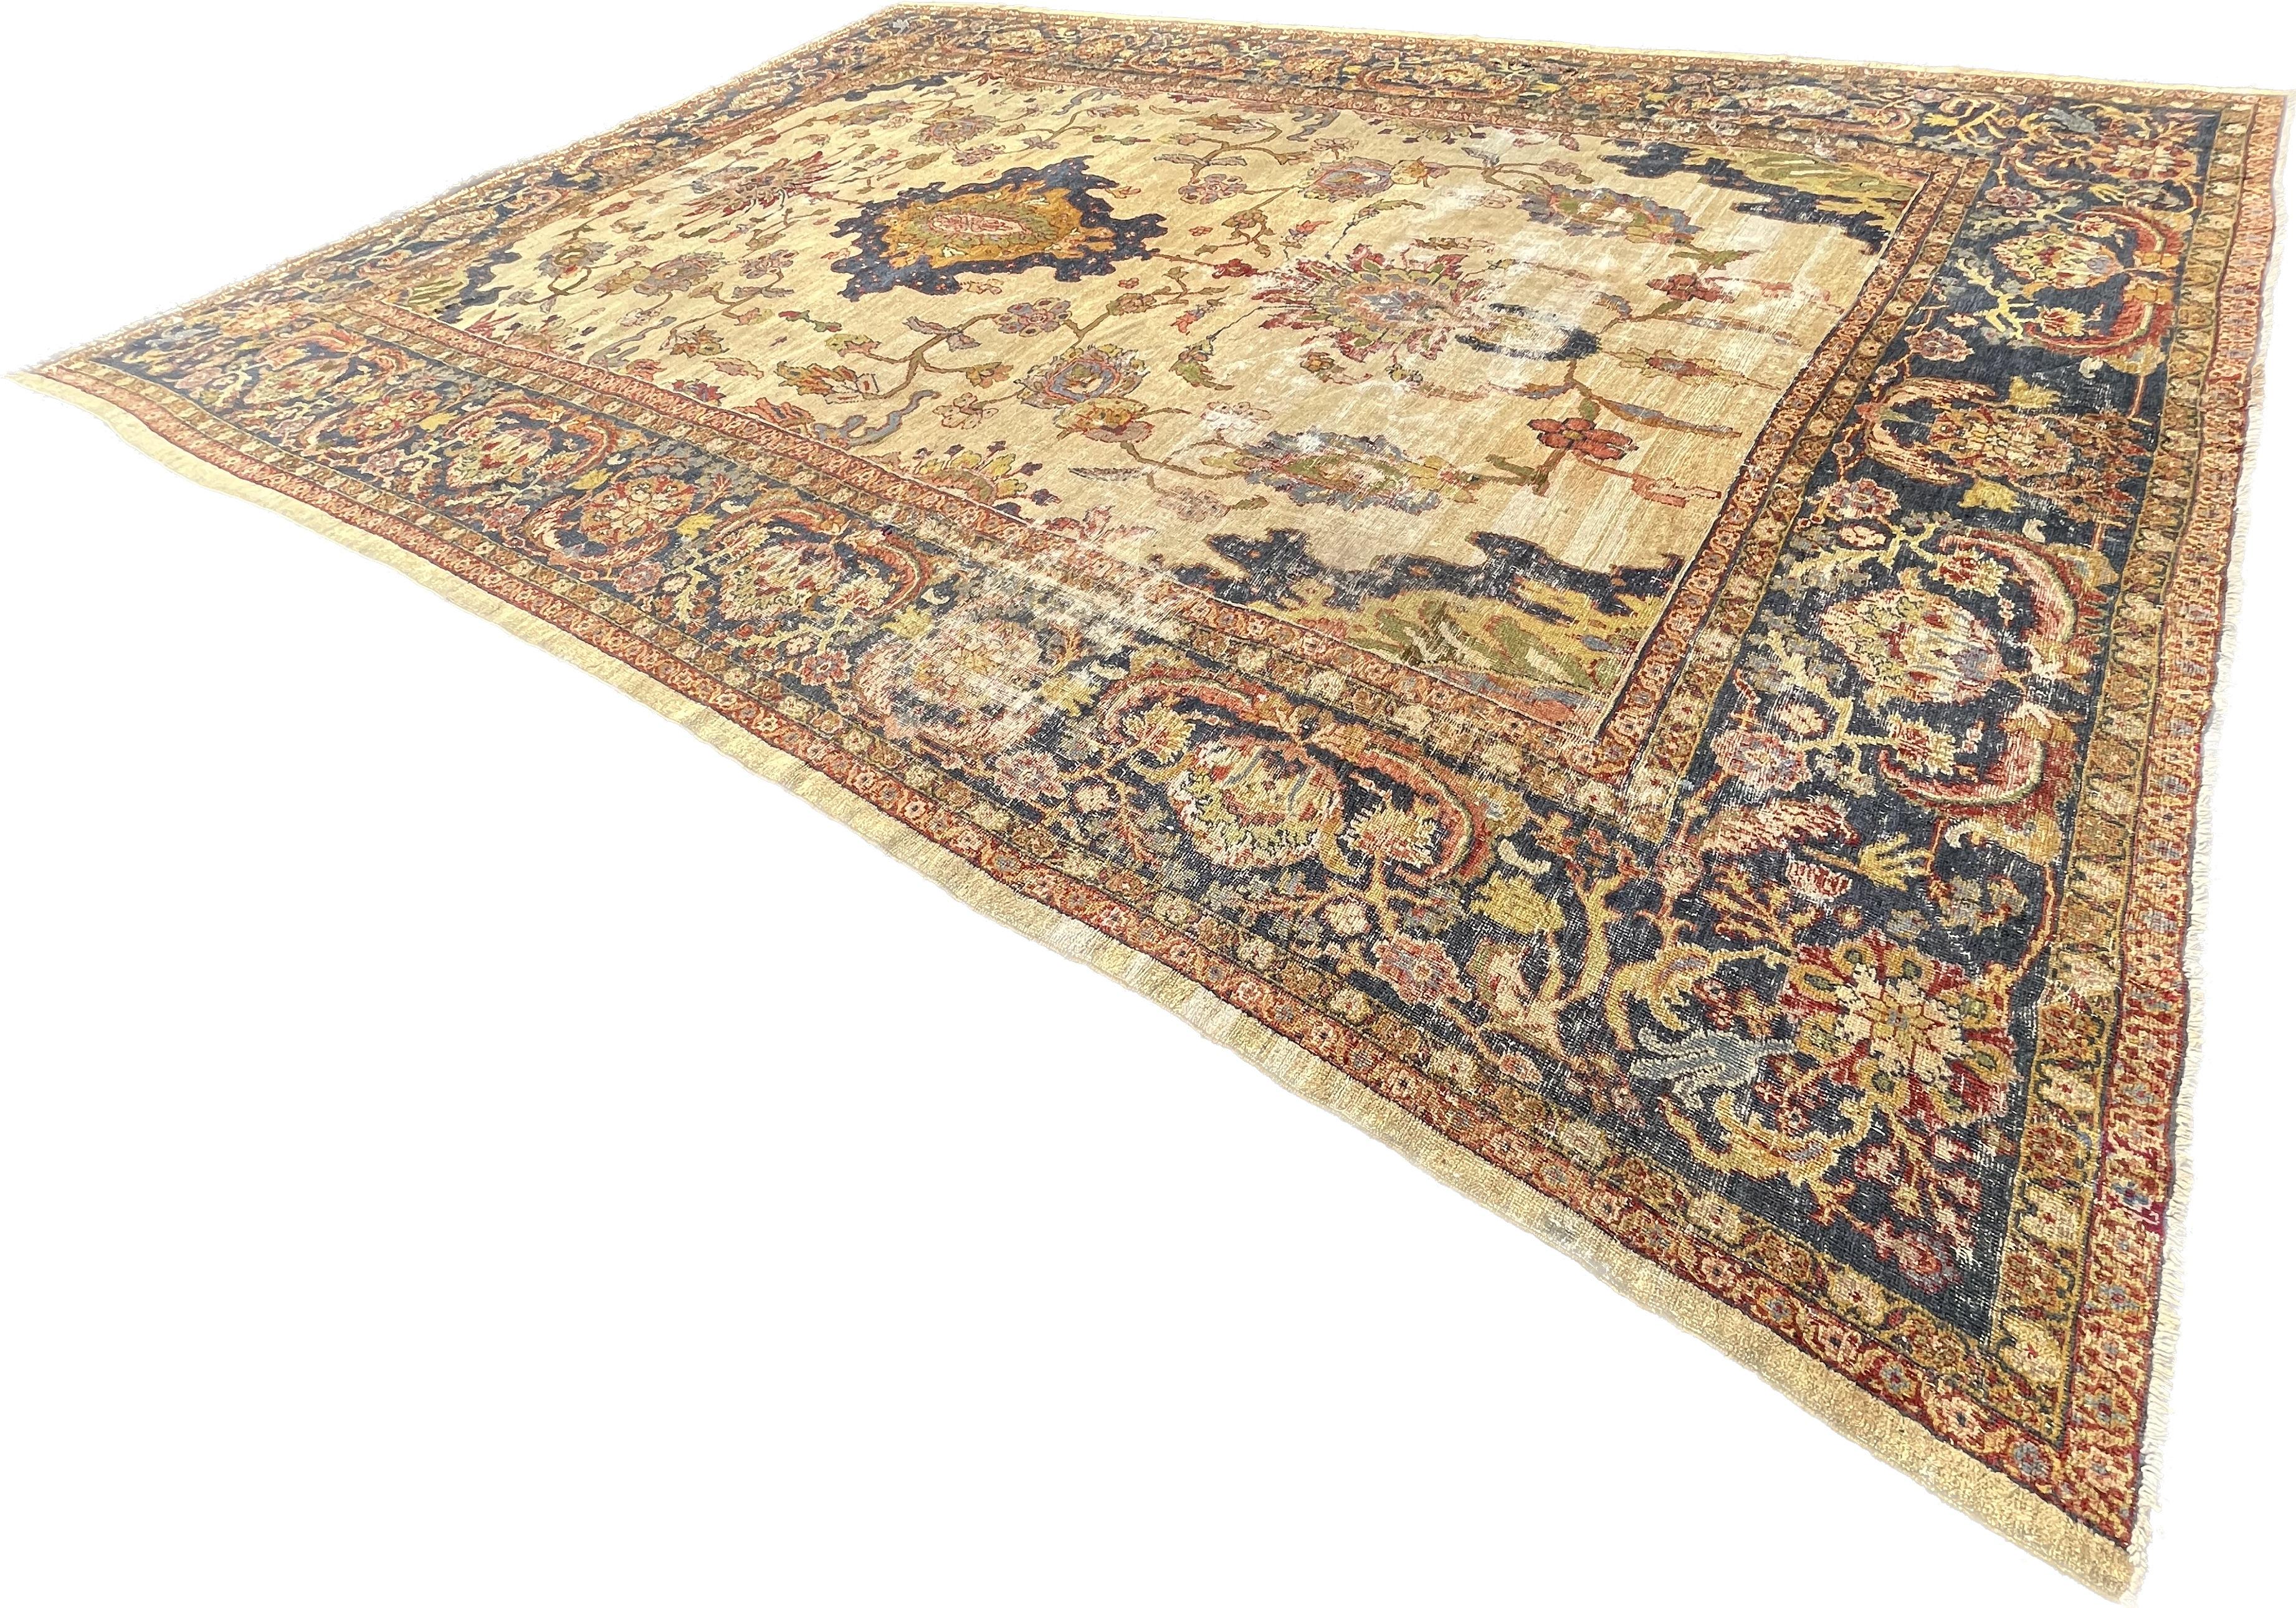 Hand-Woven Antique Carpet Mahal Sultanabad Collection